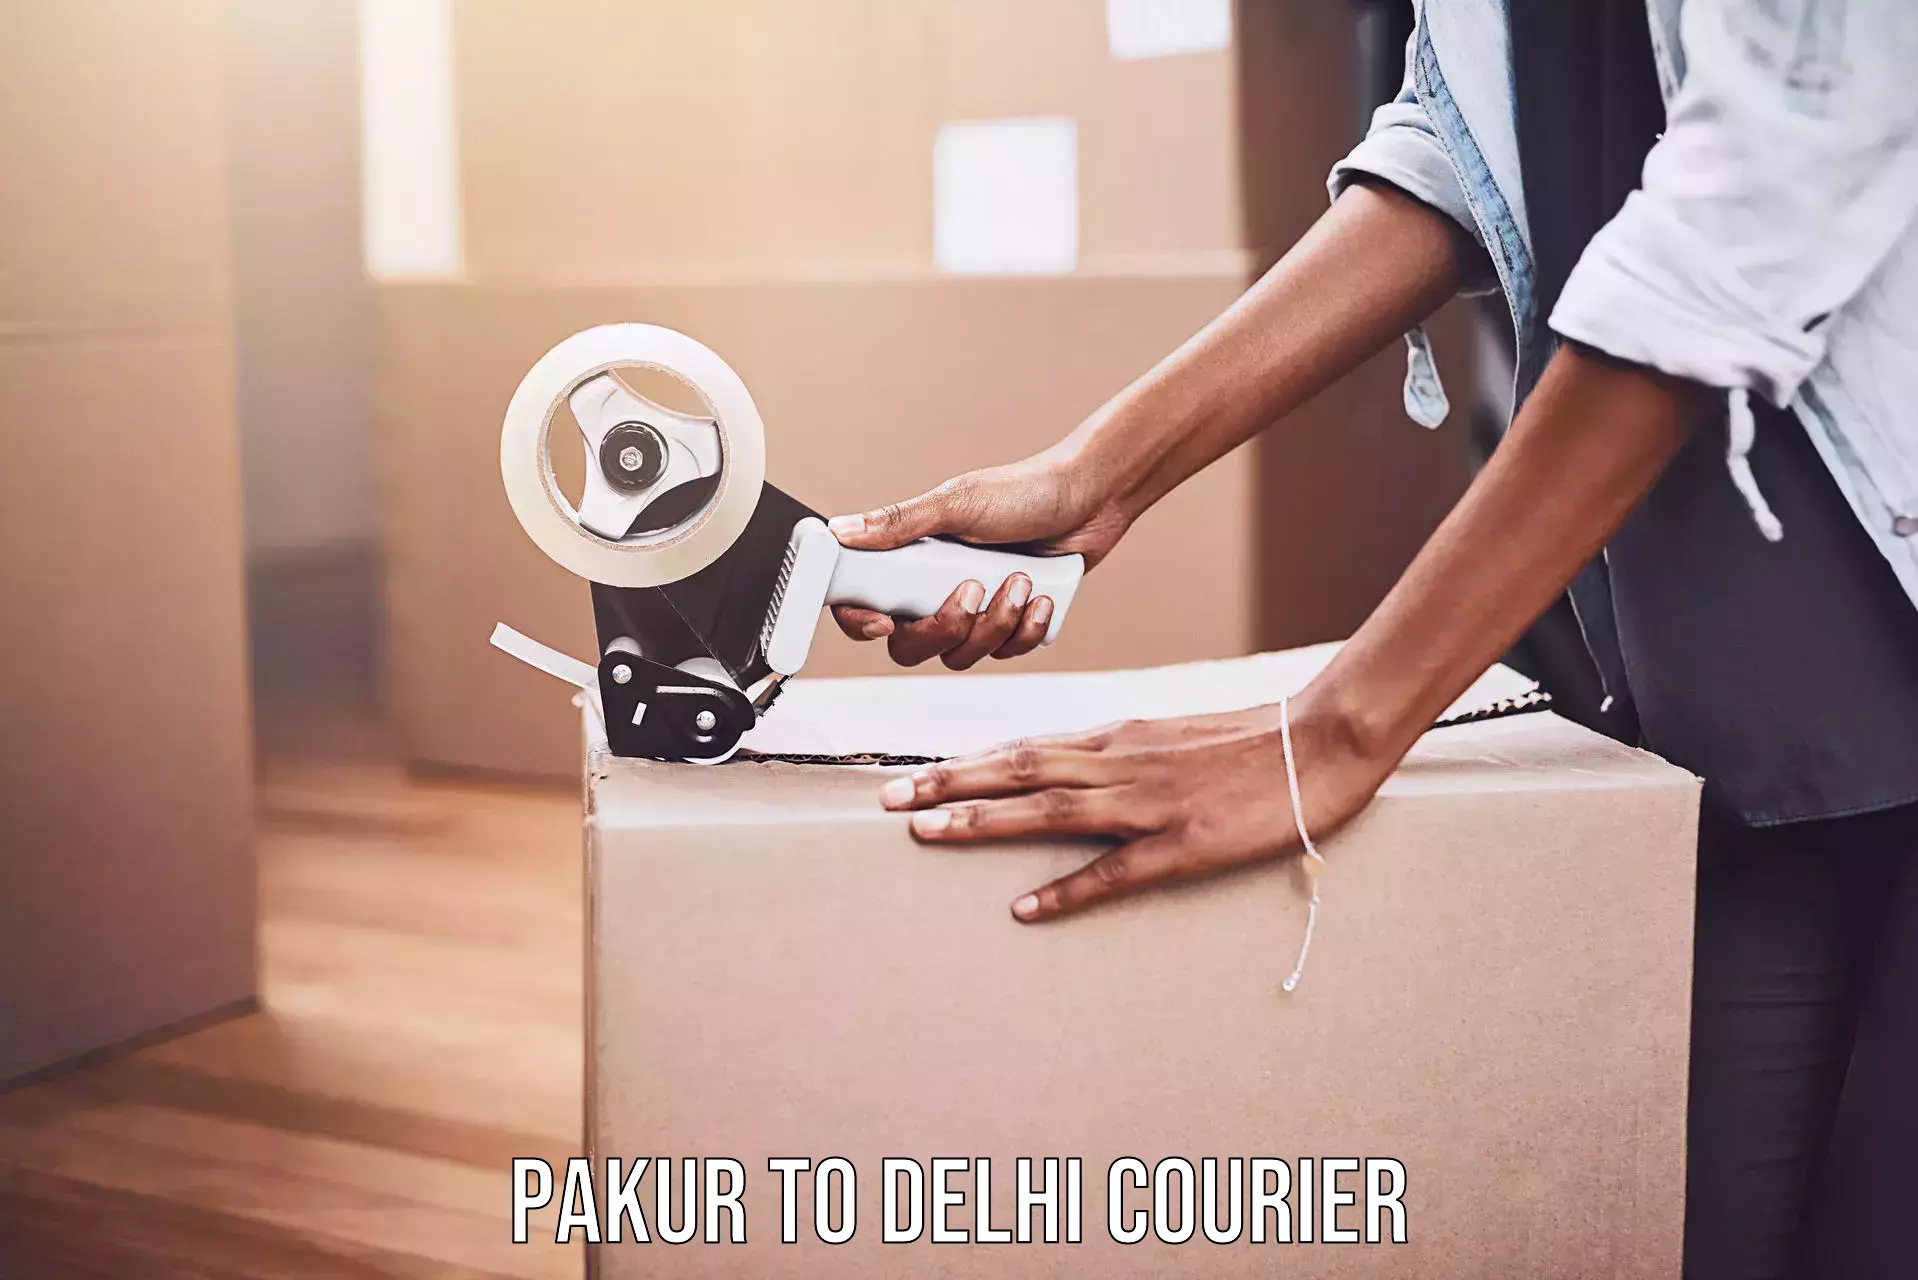 Next-day delivery options Pakur to Lodhi Road